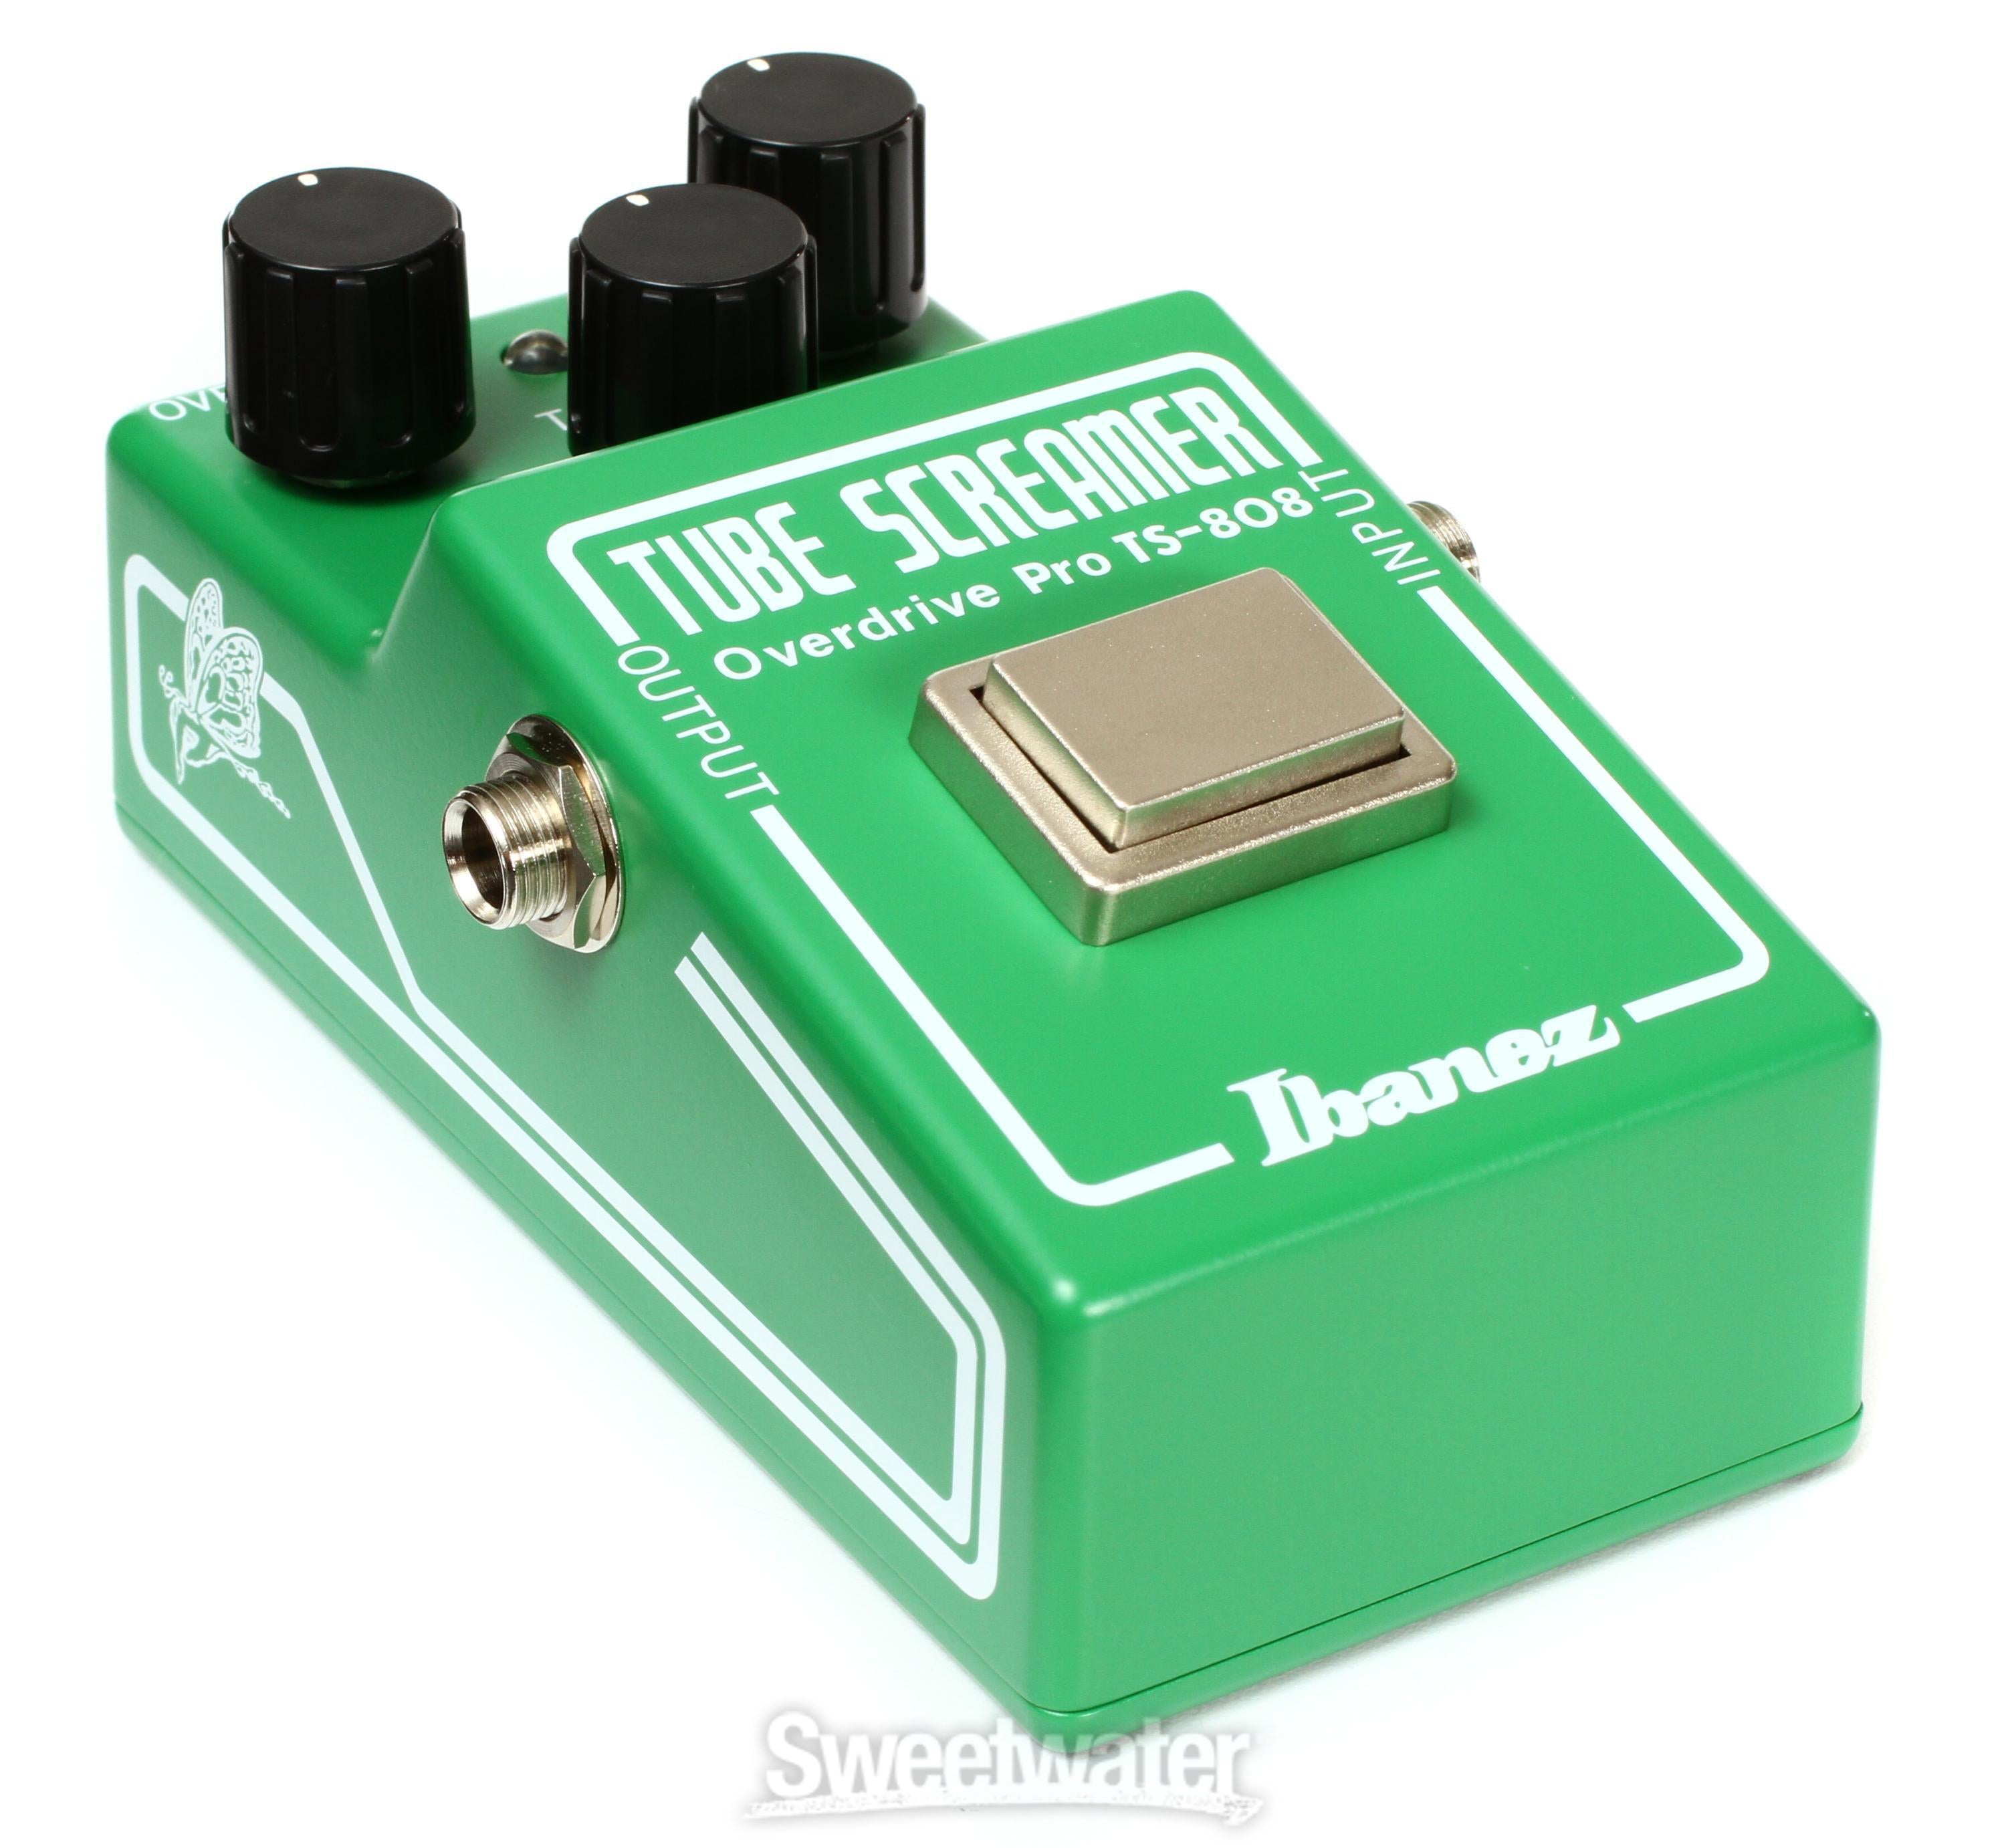 Ibanez TS808 35th Anniversary Overdrive | Sweetwater